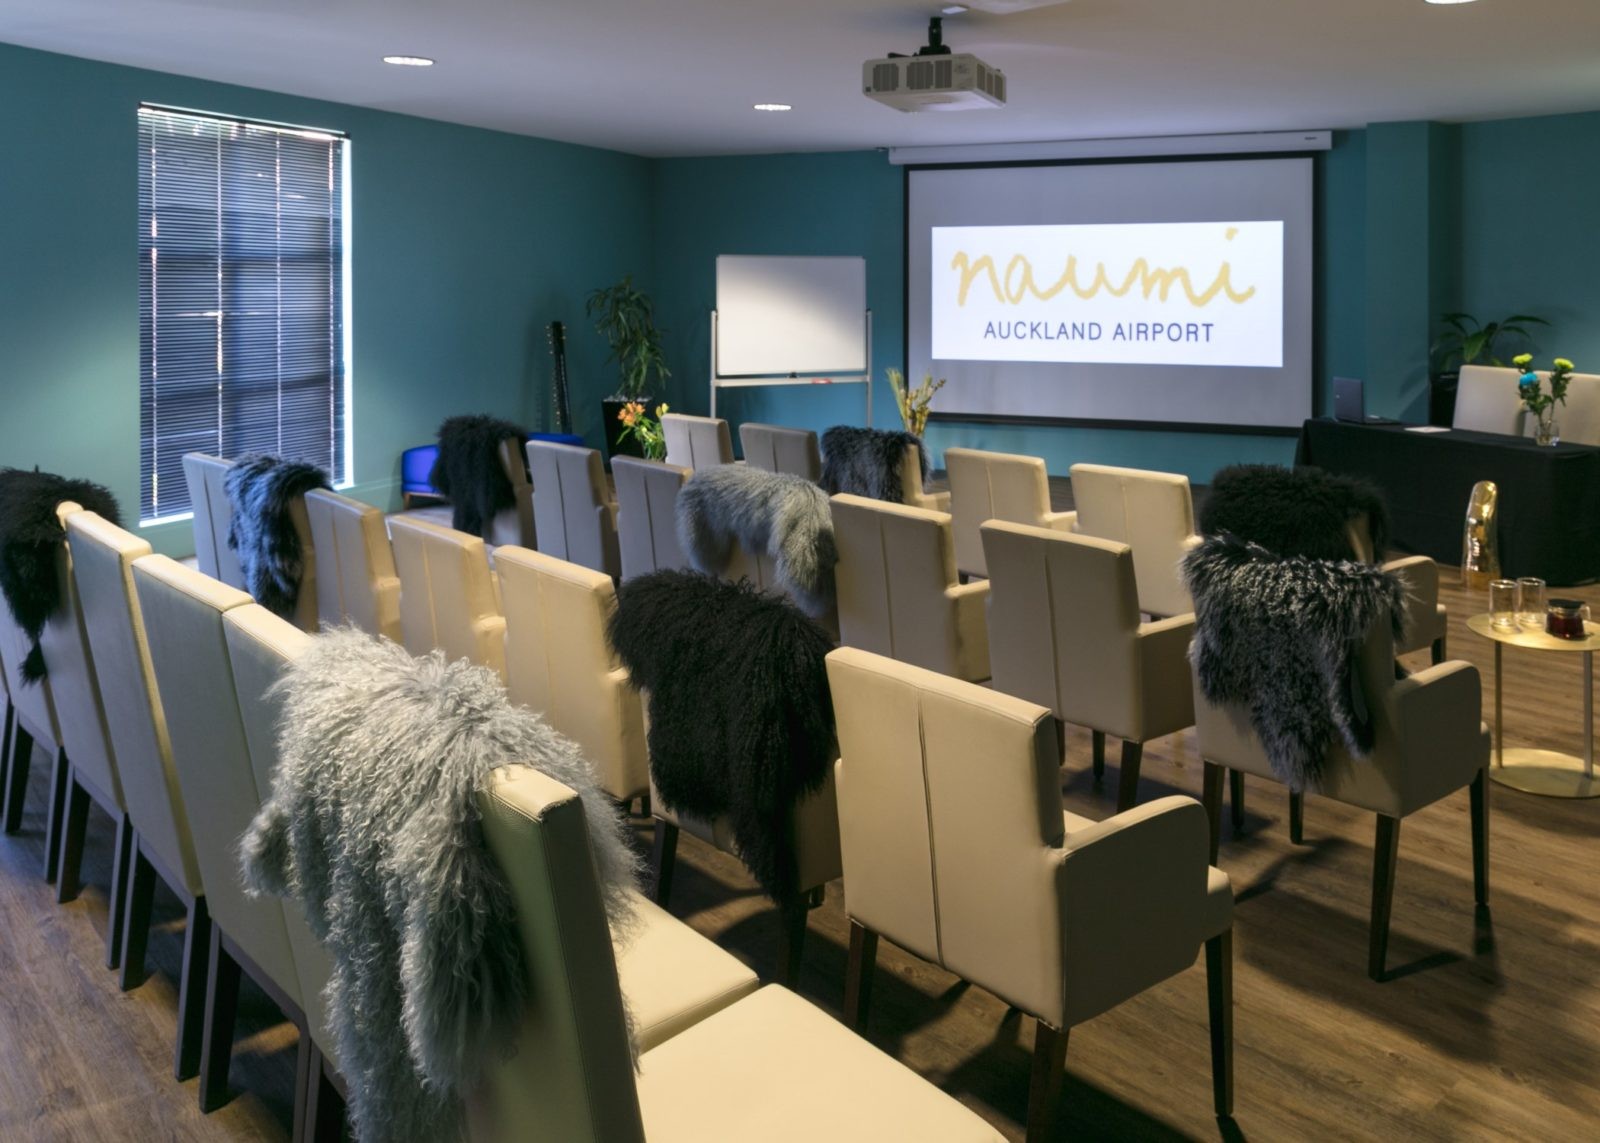 Naumi, hotel, airport, auckland, boardroom, conference, meeting, space, function, event, planning, corporate, rooms